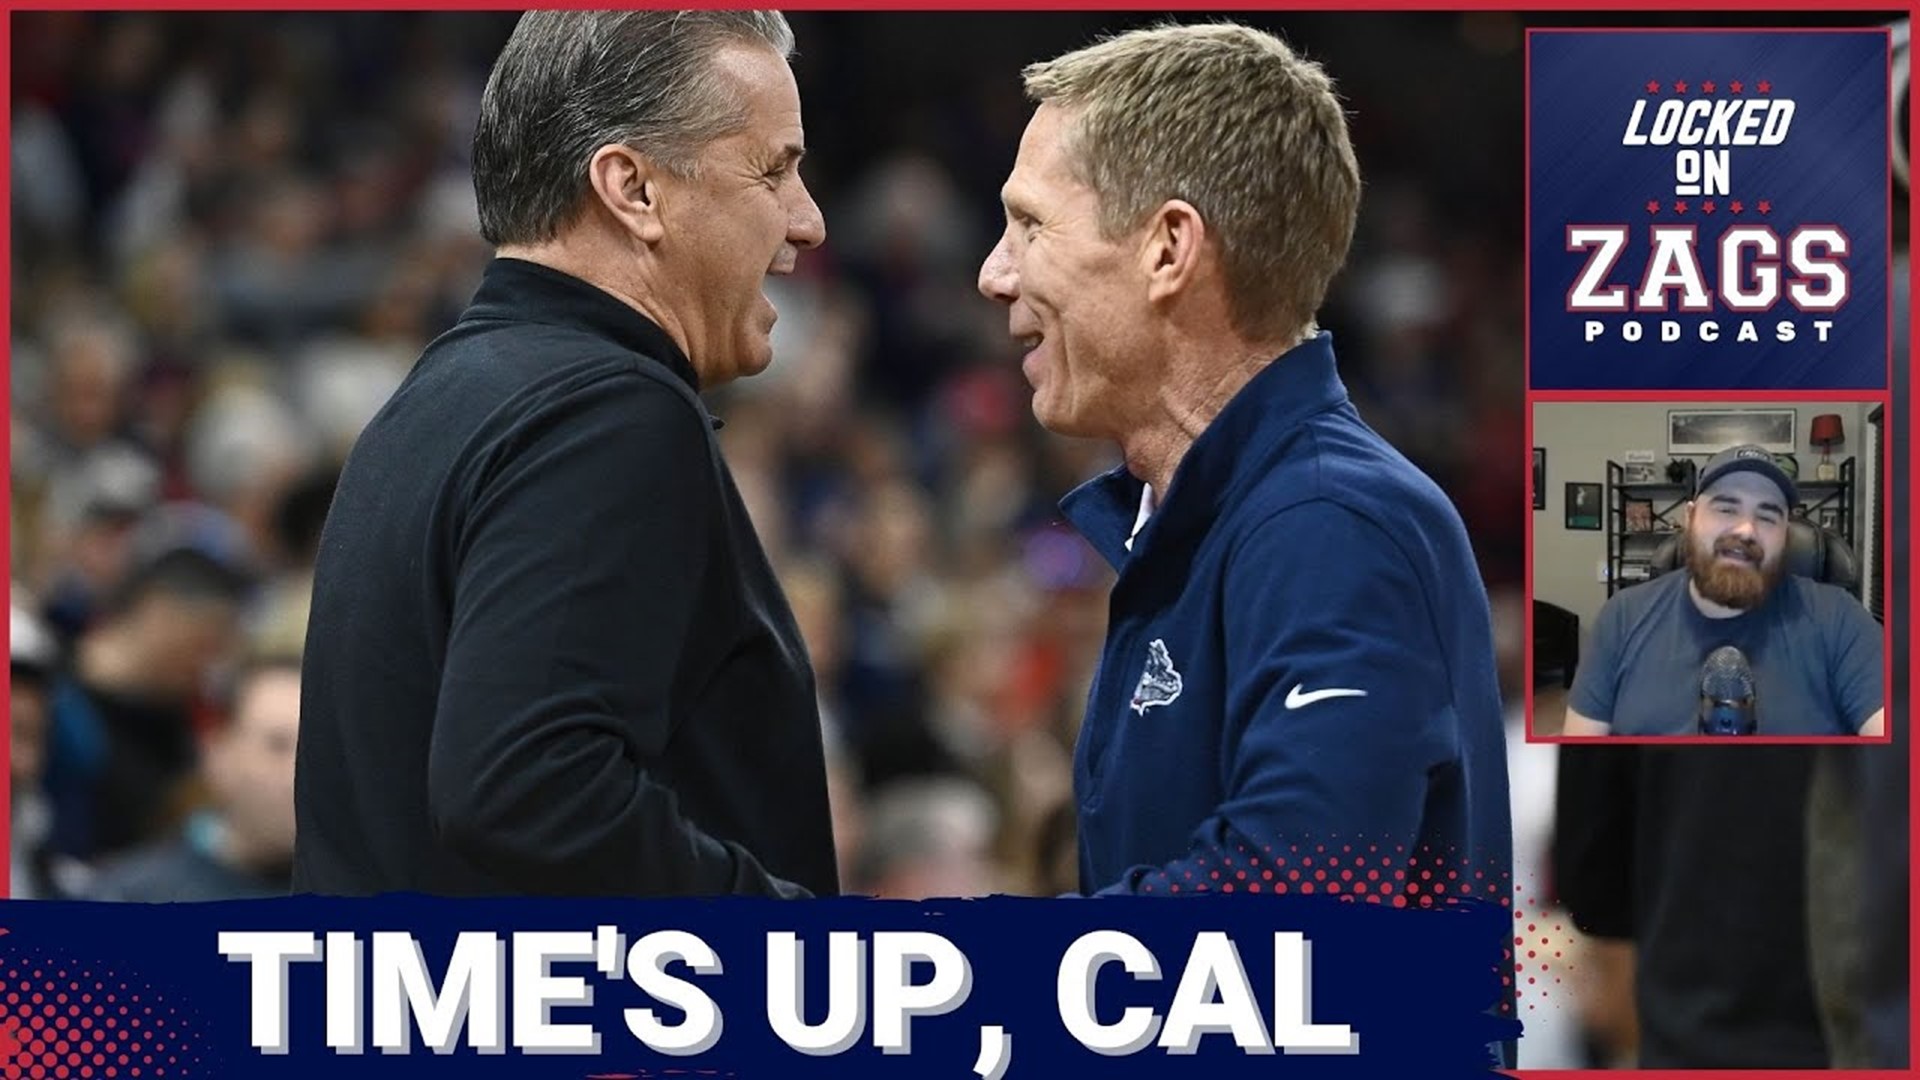 John Calipari's job security is tenuous at best right now. What does this mean for Mark Few and the Gonzaga Bulldogs and their future matchups with Kentucky?